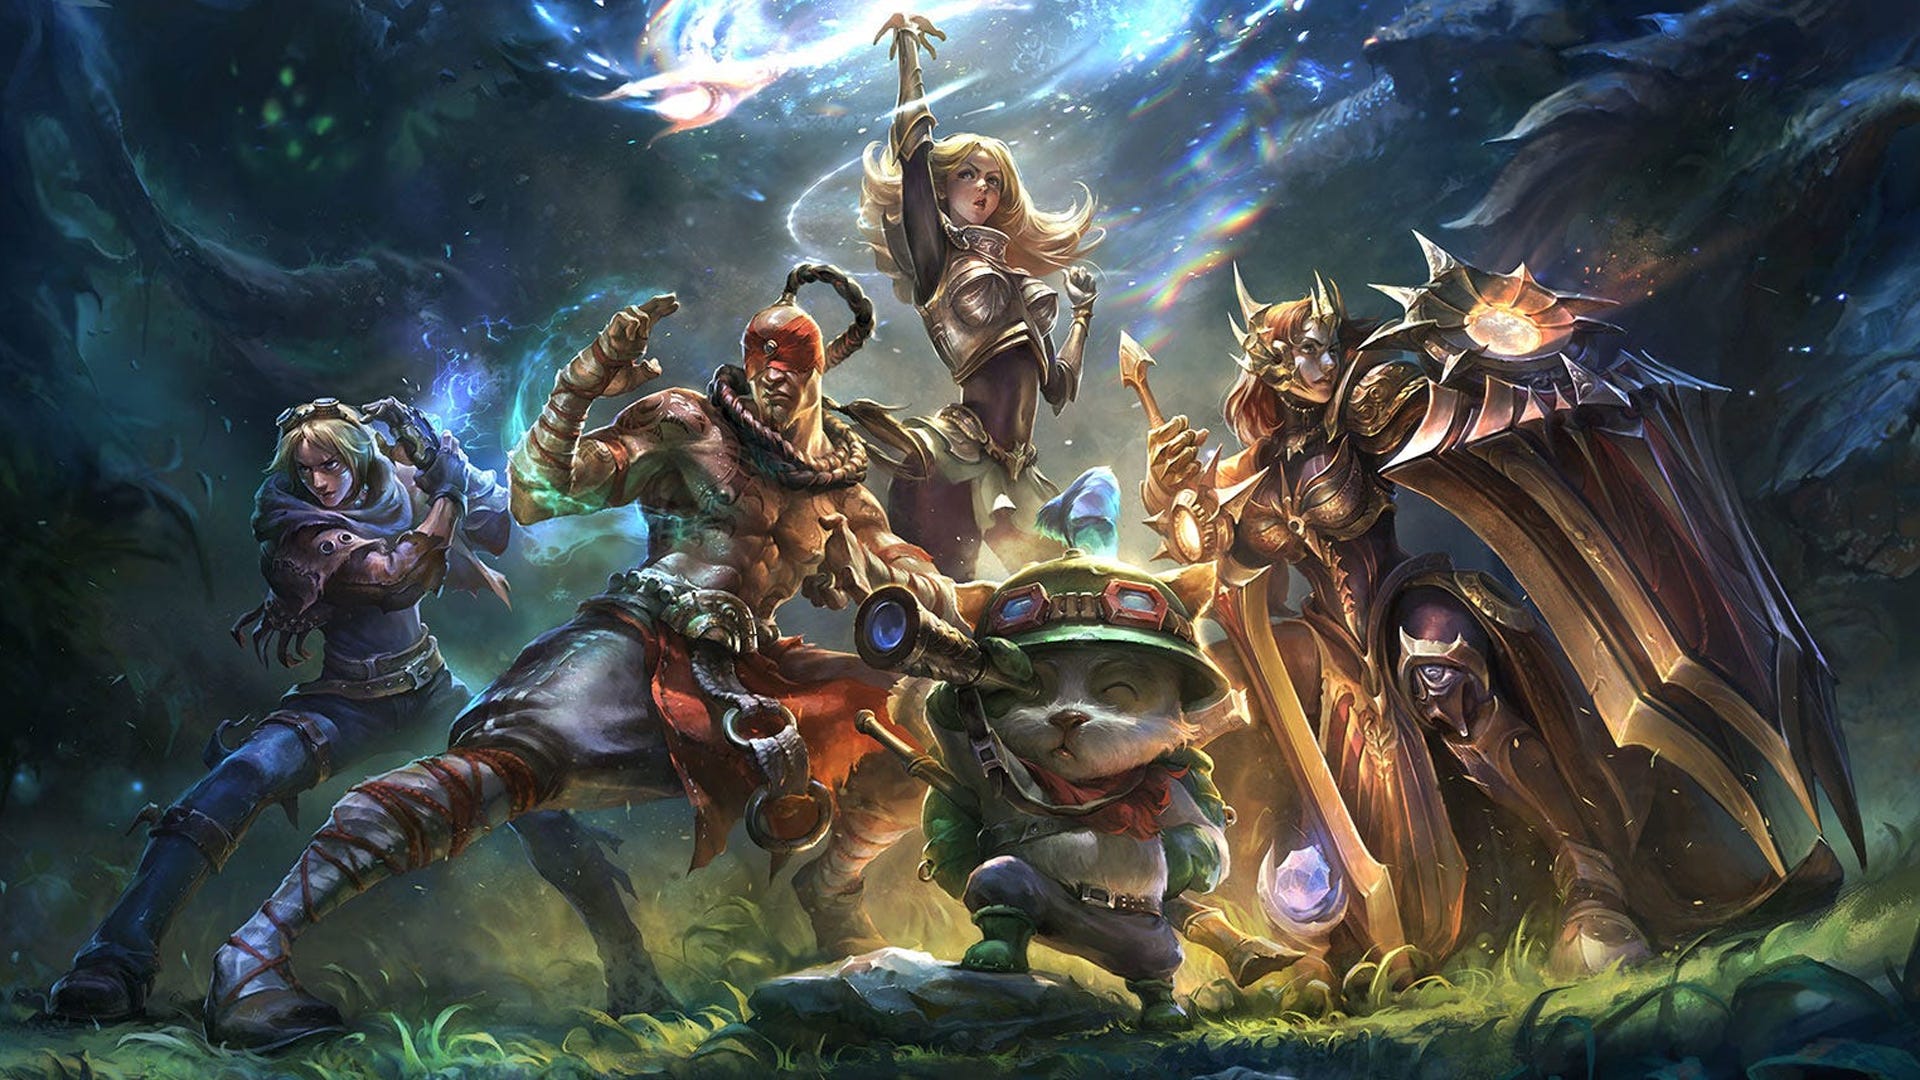 League of Legends’ anti-cheat won't brick your PC, Riot insist, after adding Valorant’s controversial system to the MOBA